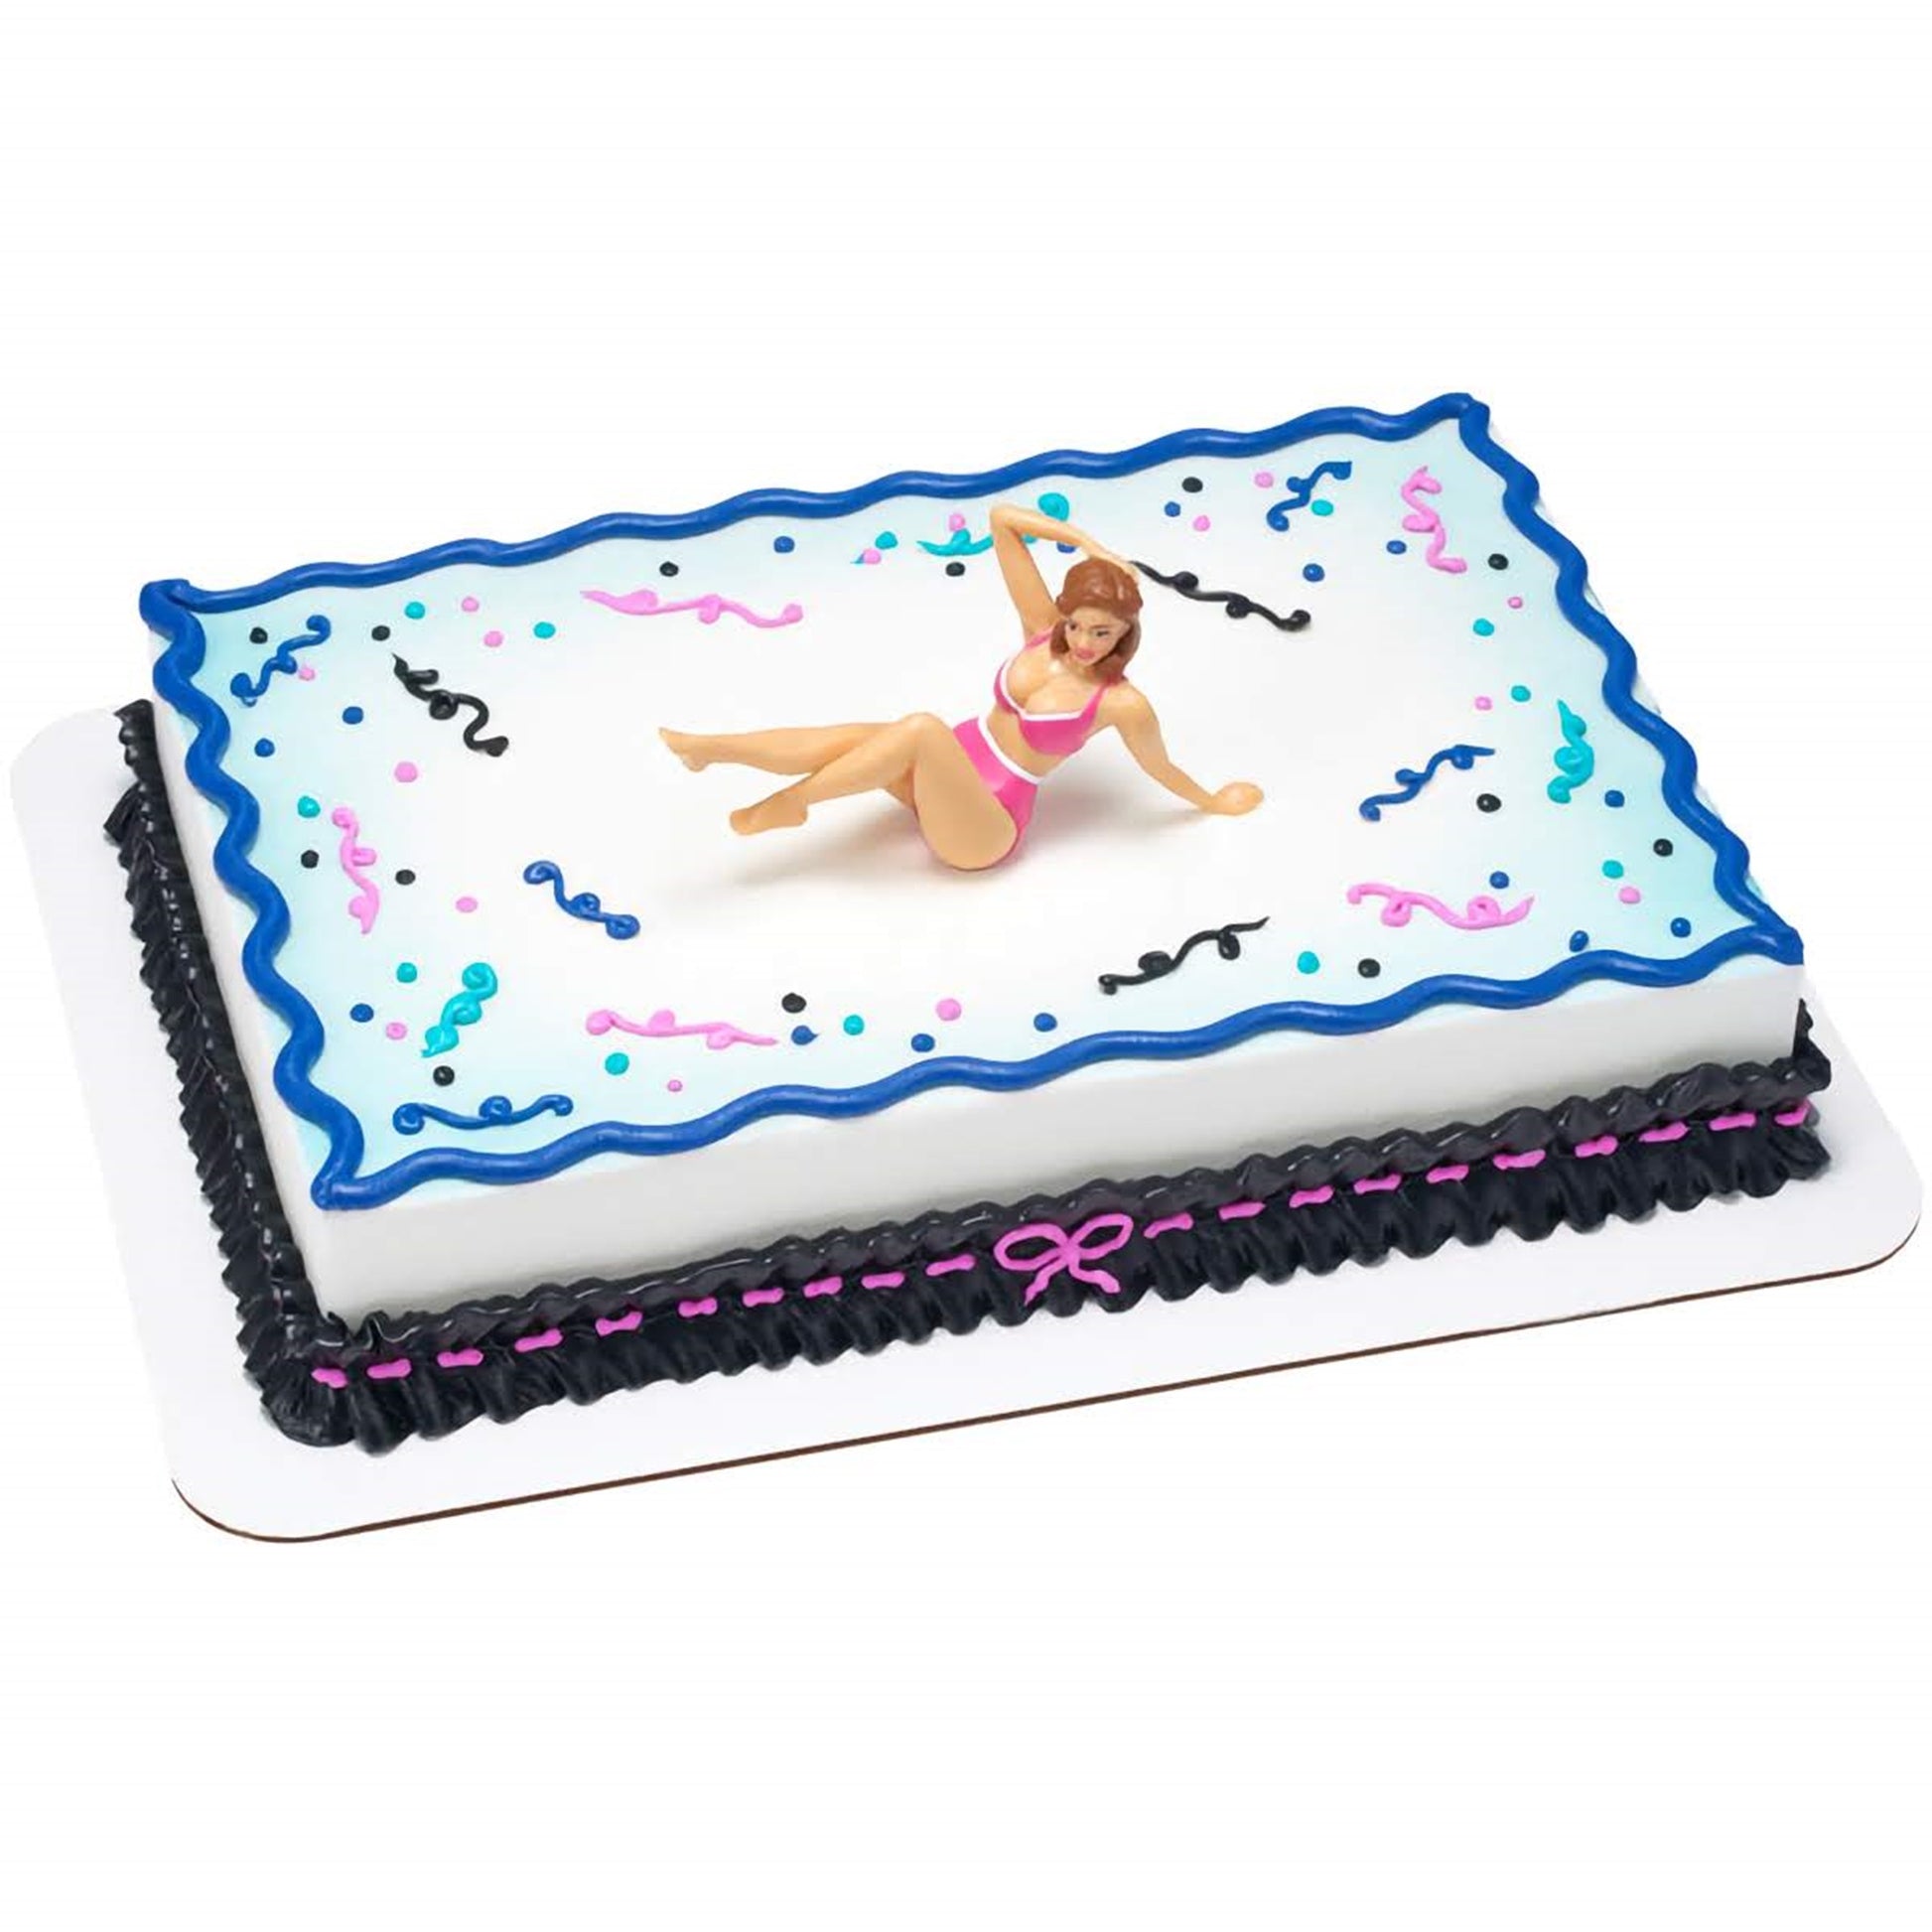 A rectangular cake adorned with a bikini-clad woman cake topper, with whimsical black and blue squiggles and pink accents. The cake's playful design is available at Lynn's Cake, Candy, and Chocolate Supplies, perfect for bachelor parties or summer-themed events.